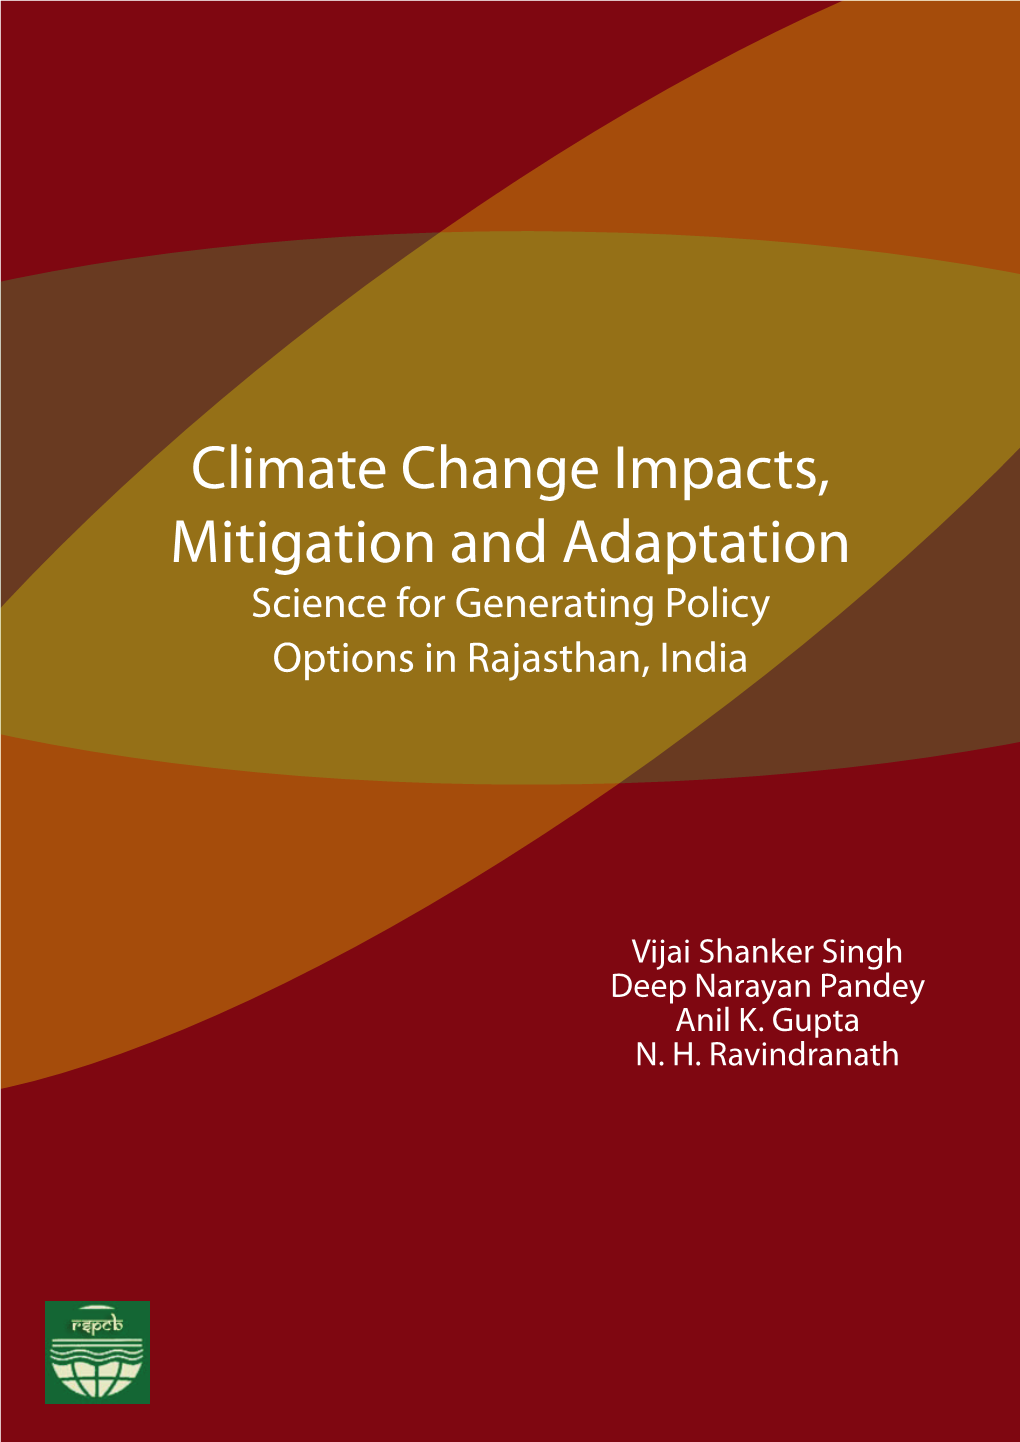 Climate Change Impacts, Mitigation and Adaptation Science for Generating Policy Options in Rajasthan, India